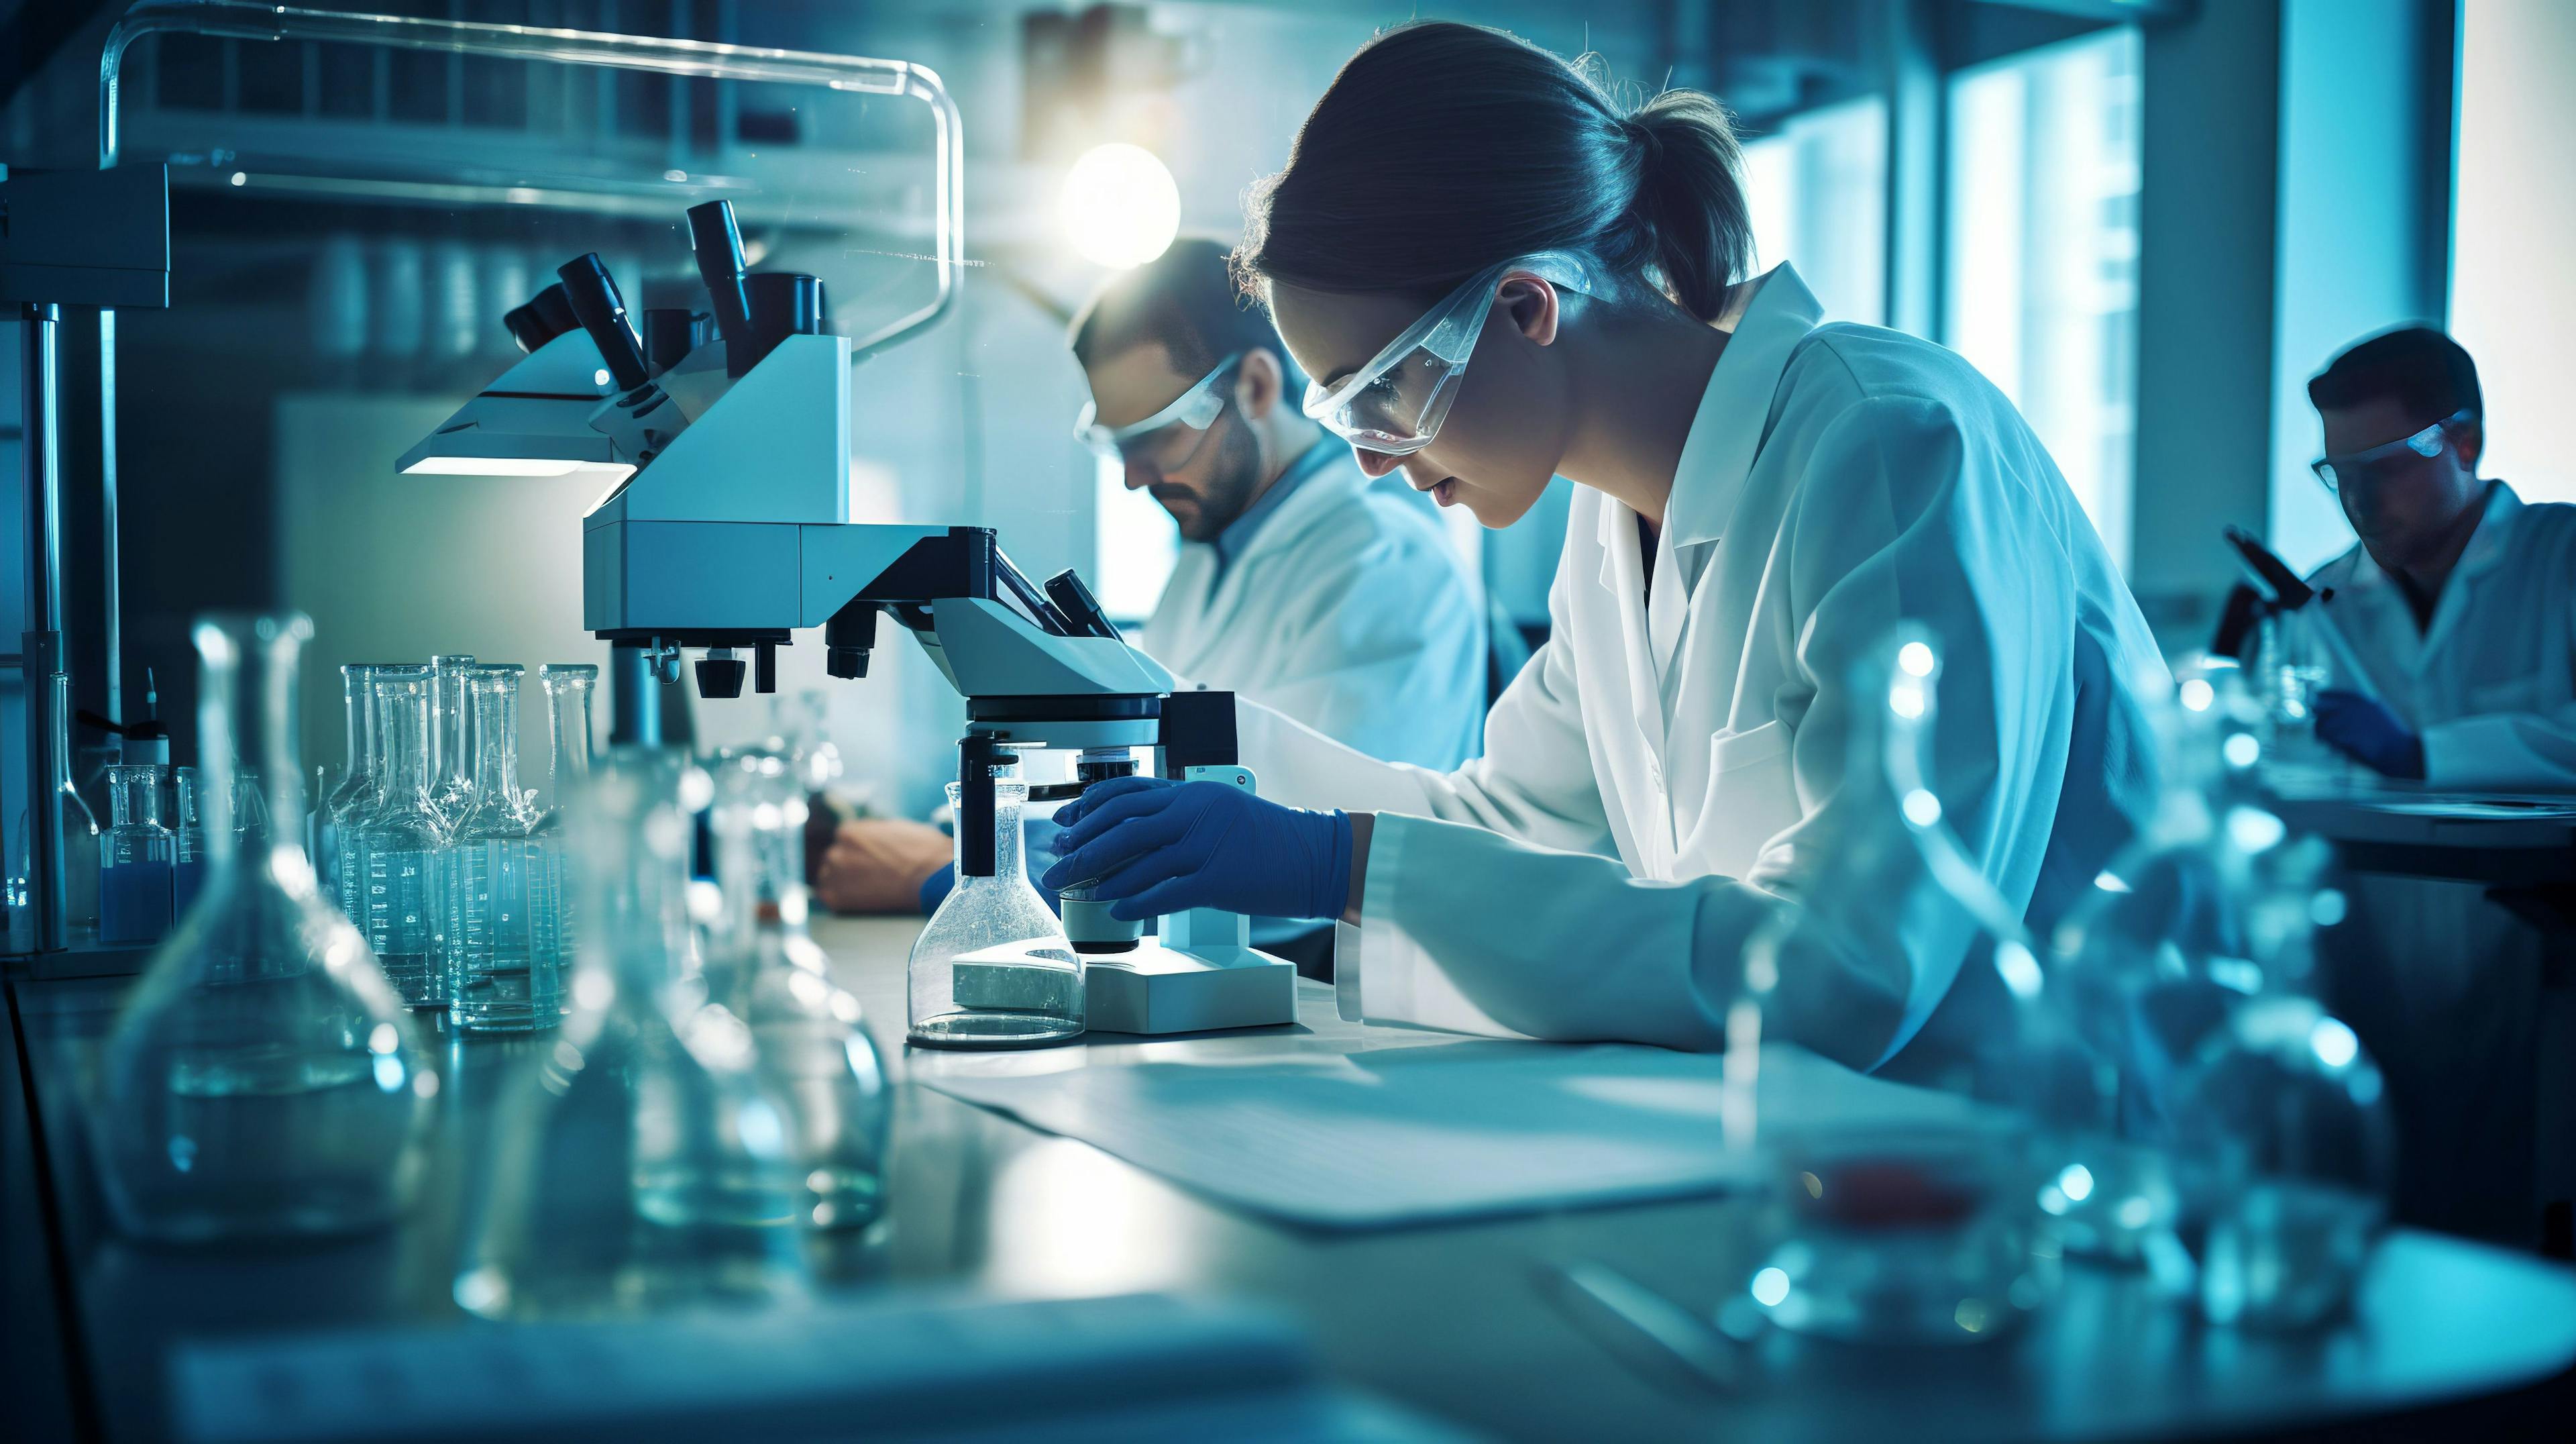 Team of Medical Research Scientists Collectively Working on a New Generation Experimental Drug Treatment. | Image Credit: © Elchin Abilov - stock.adobe.com